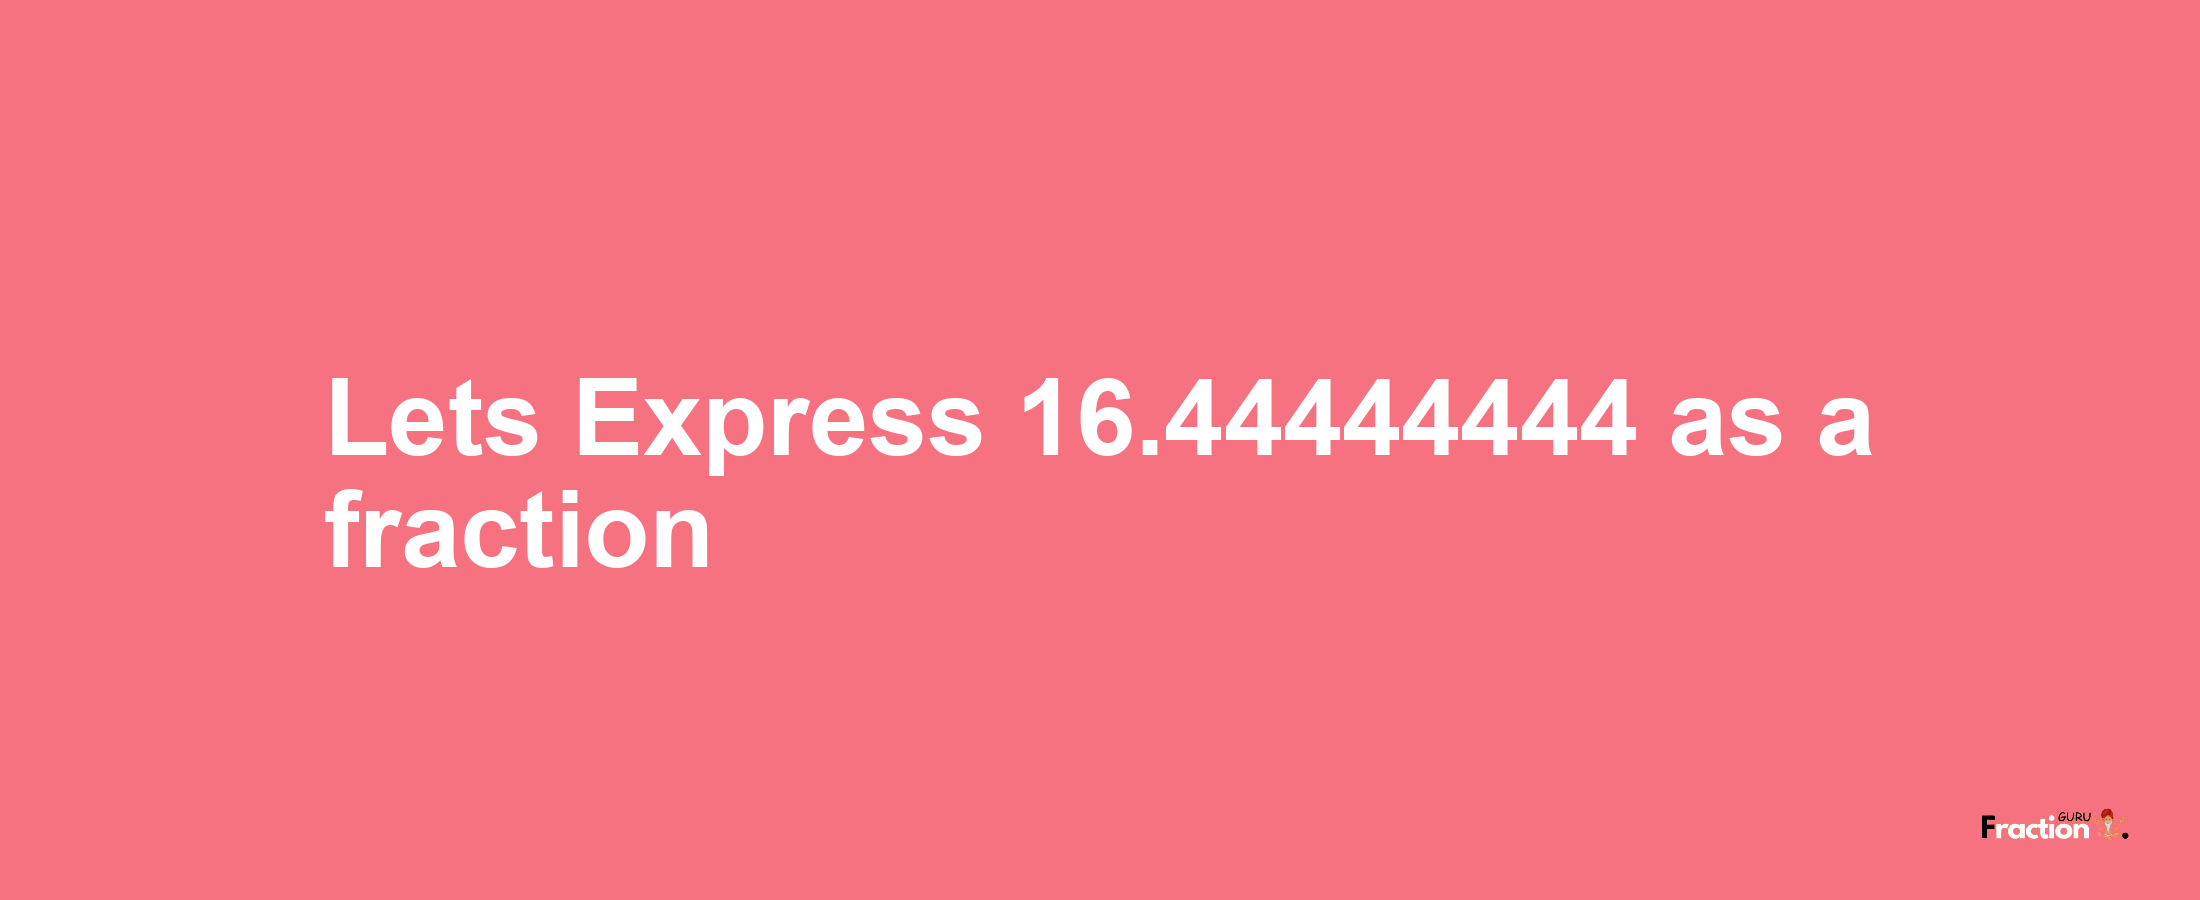 Lets Express 16.44444444 as afraction